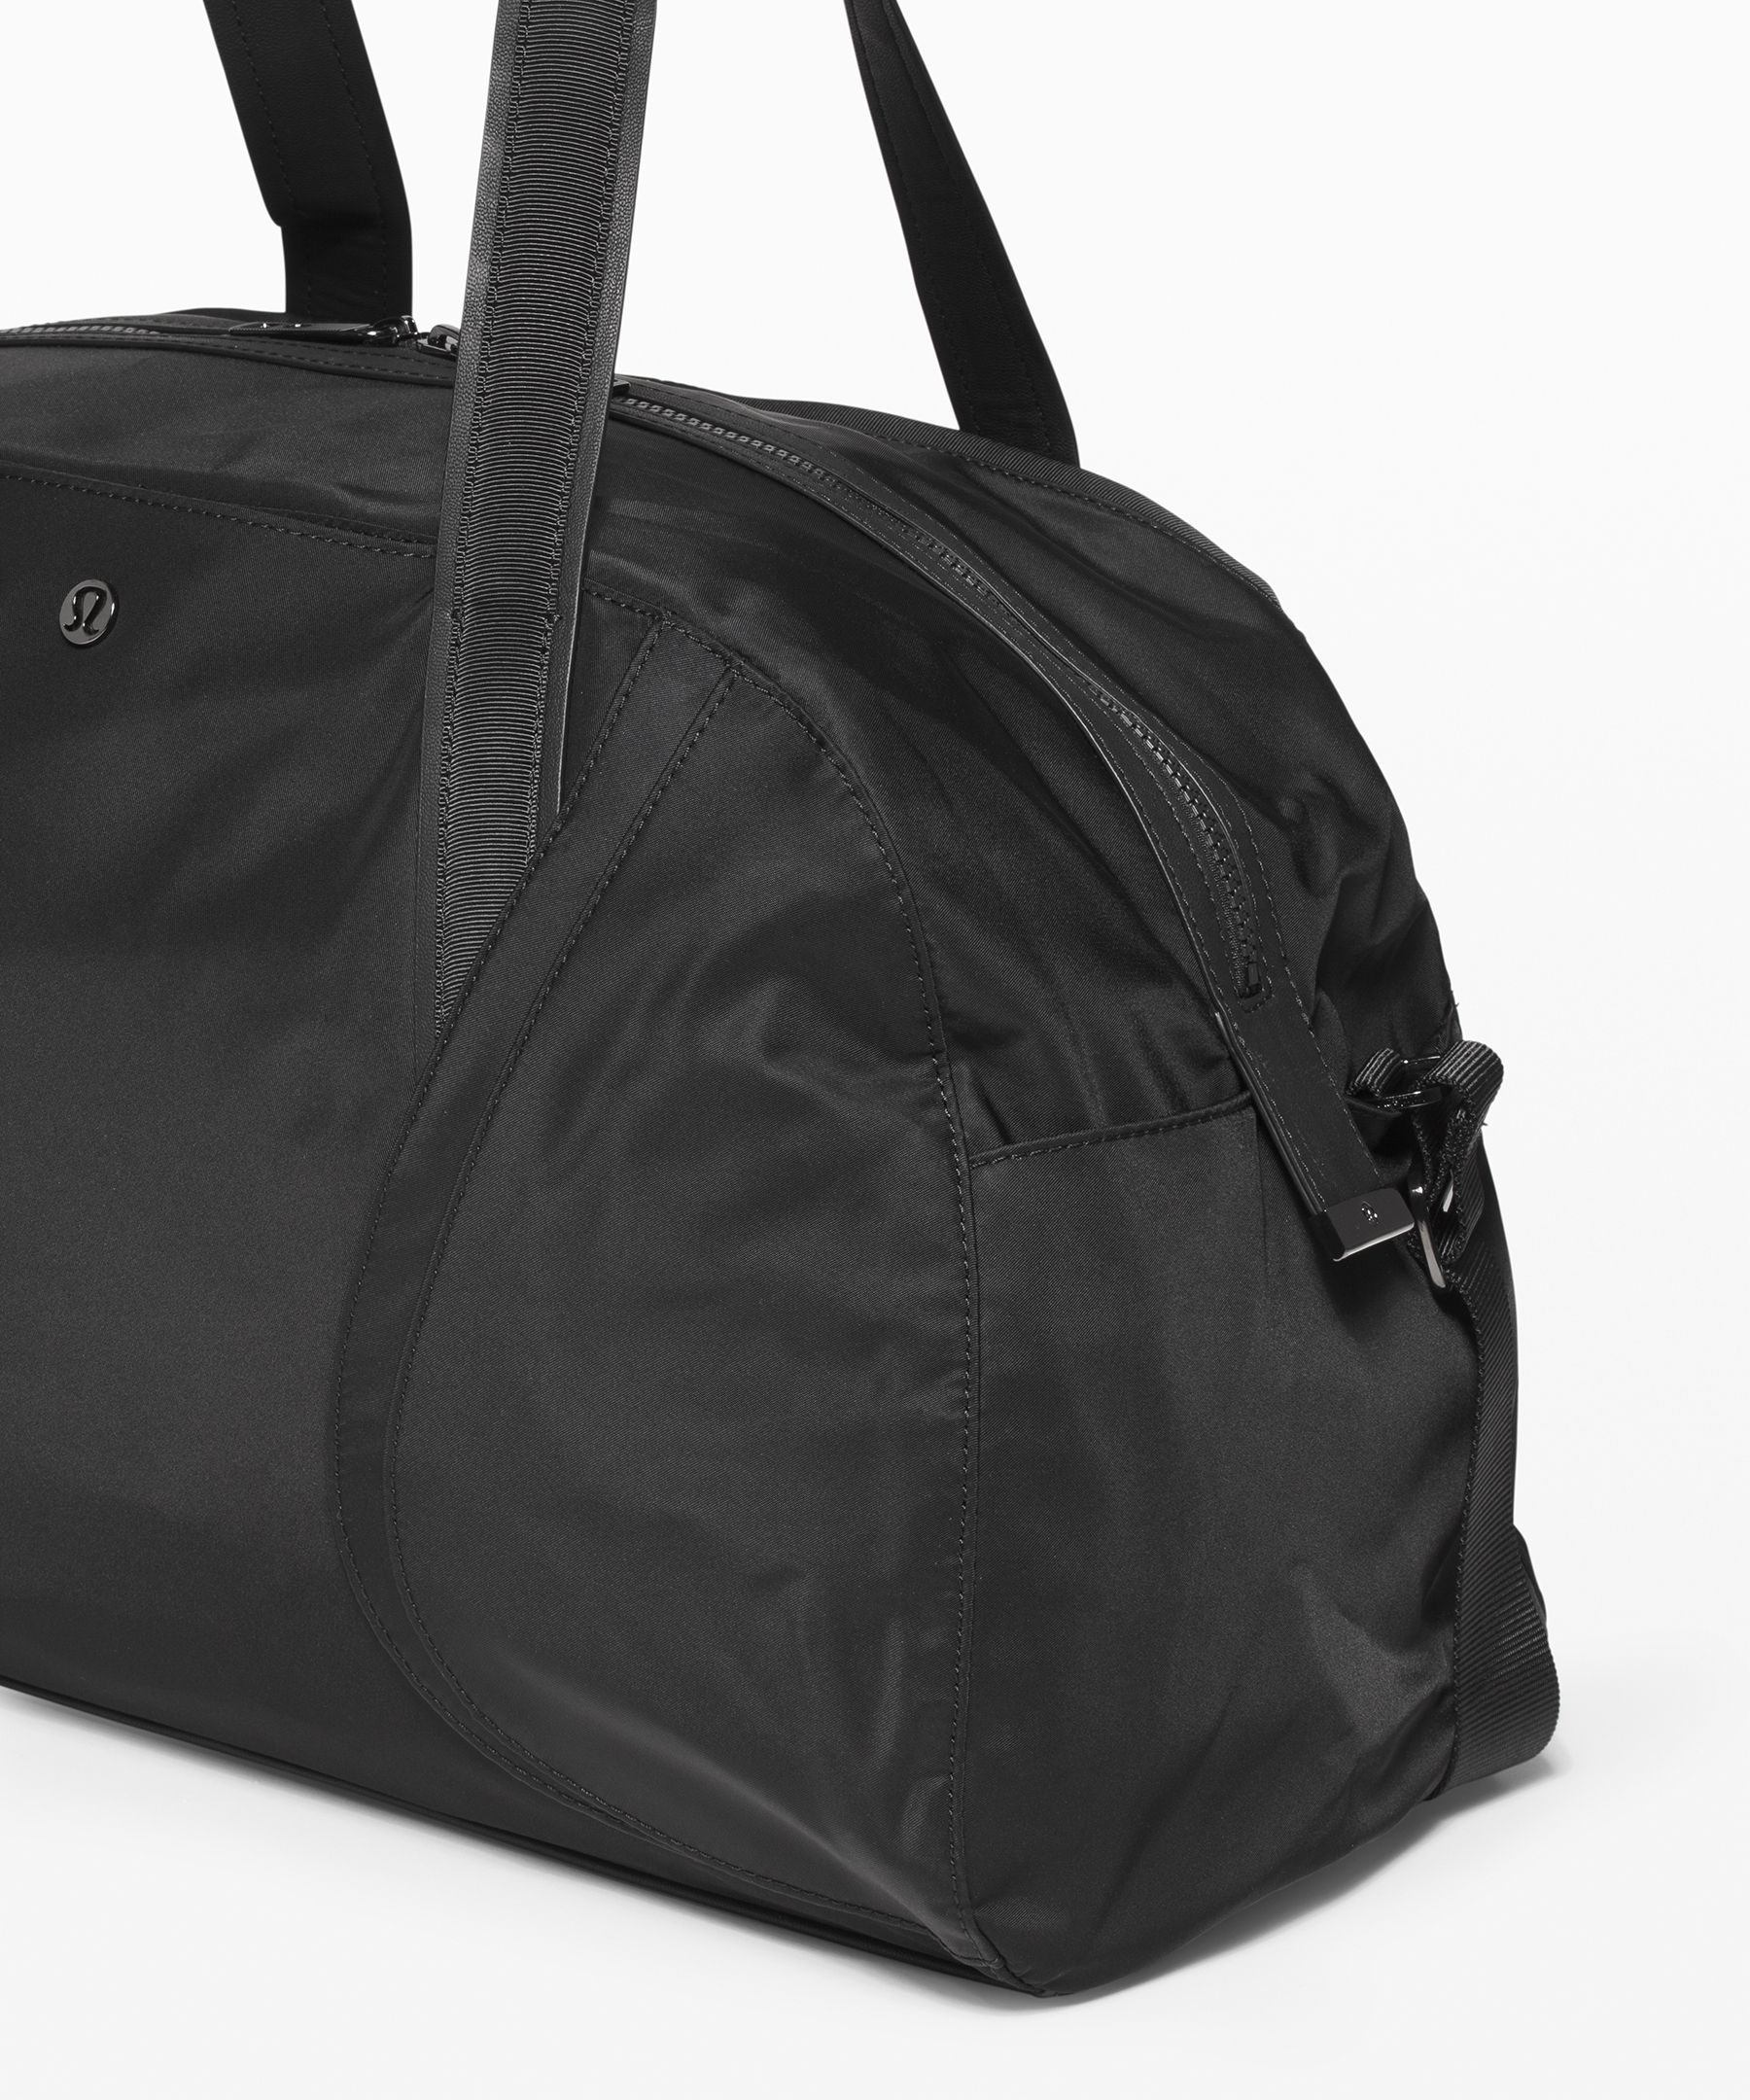 lululemon out of range duffel review